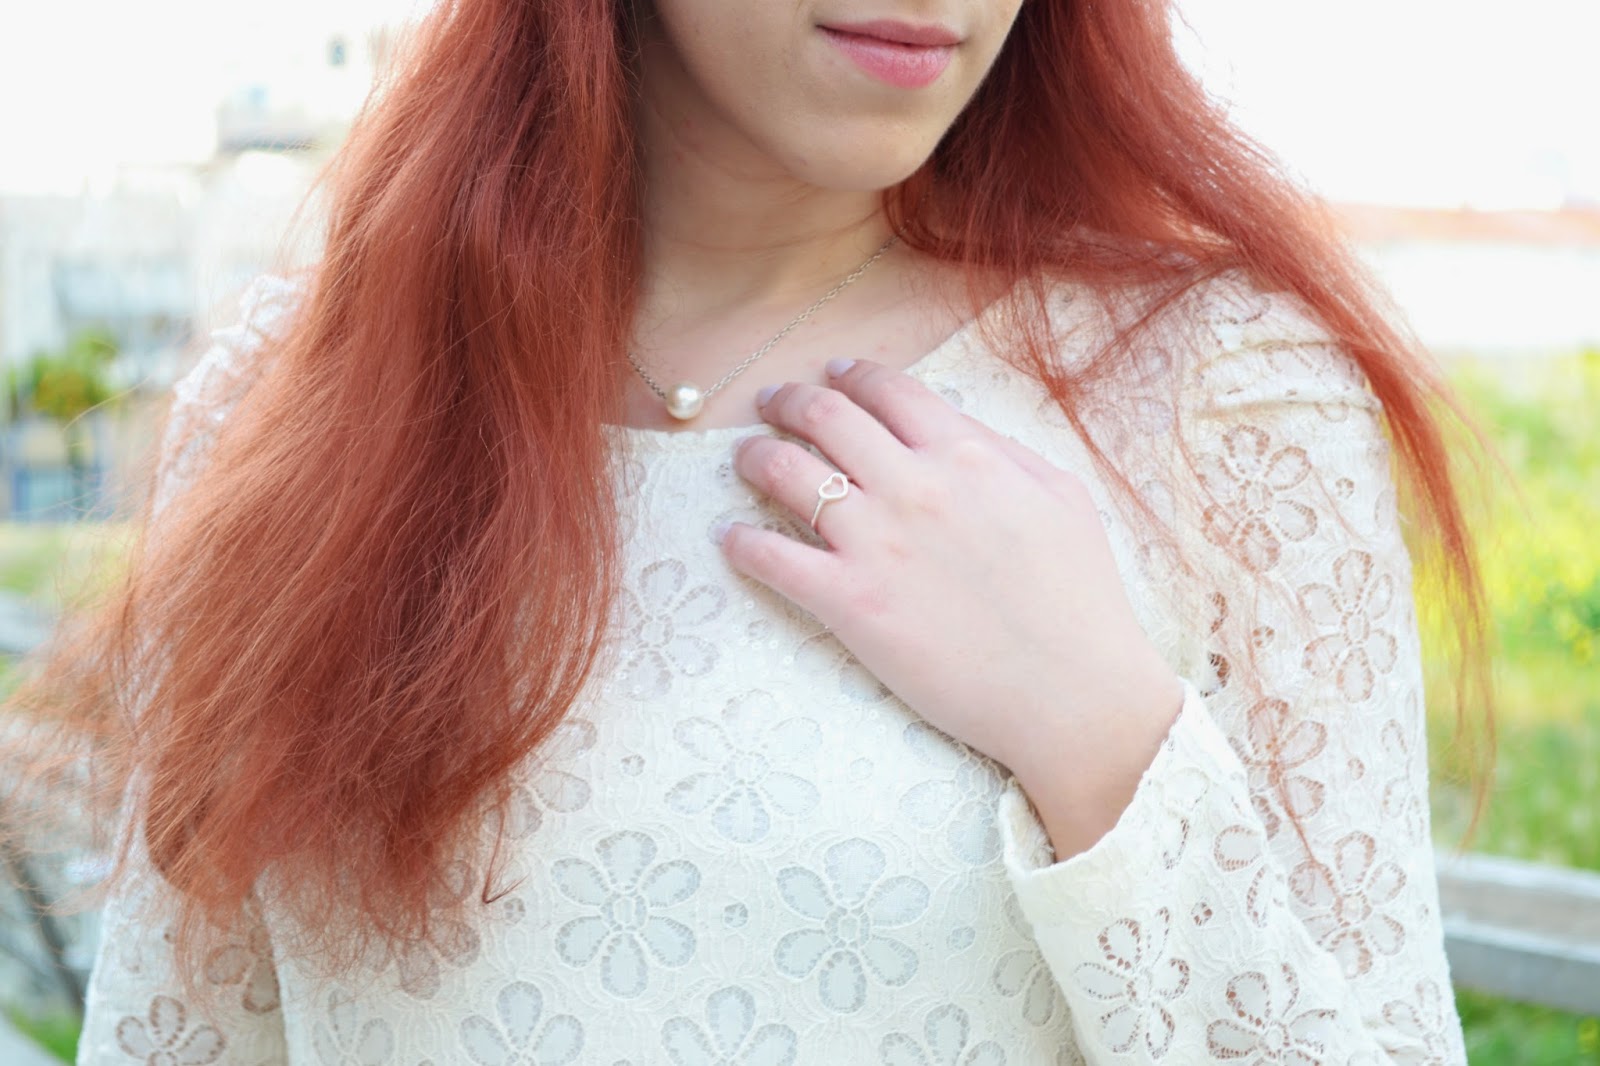 Anna ,Keni,redhead, spotlights on the redhead,fashion,model,blogger, oasap, dress, white, lace, rings and tings, pearl, necklace, heart, ring, spring, review,outfit,zara, shoes,